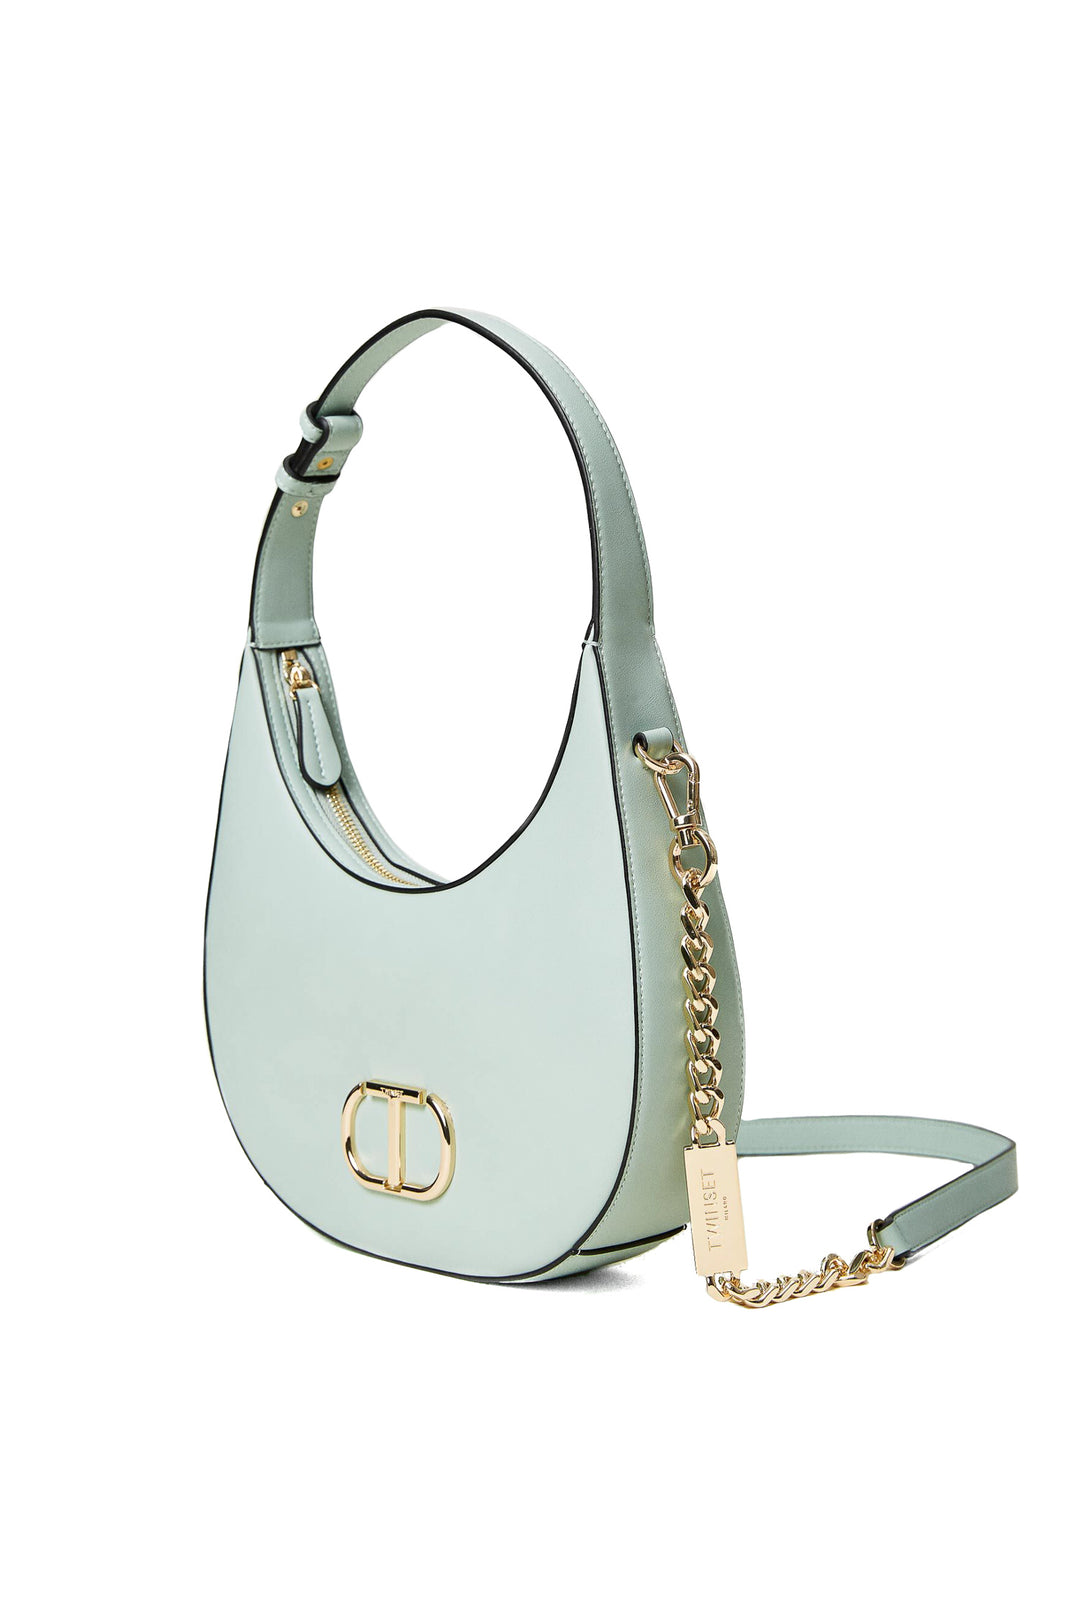 TWINSET Borsa a tracolla 'Moon' verde agave con Oval T - Mancinelli 1954